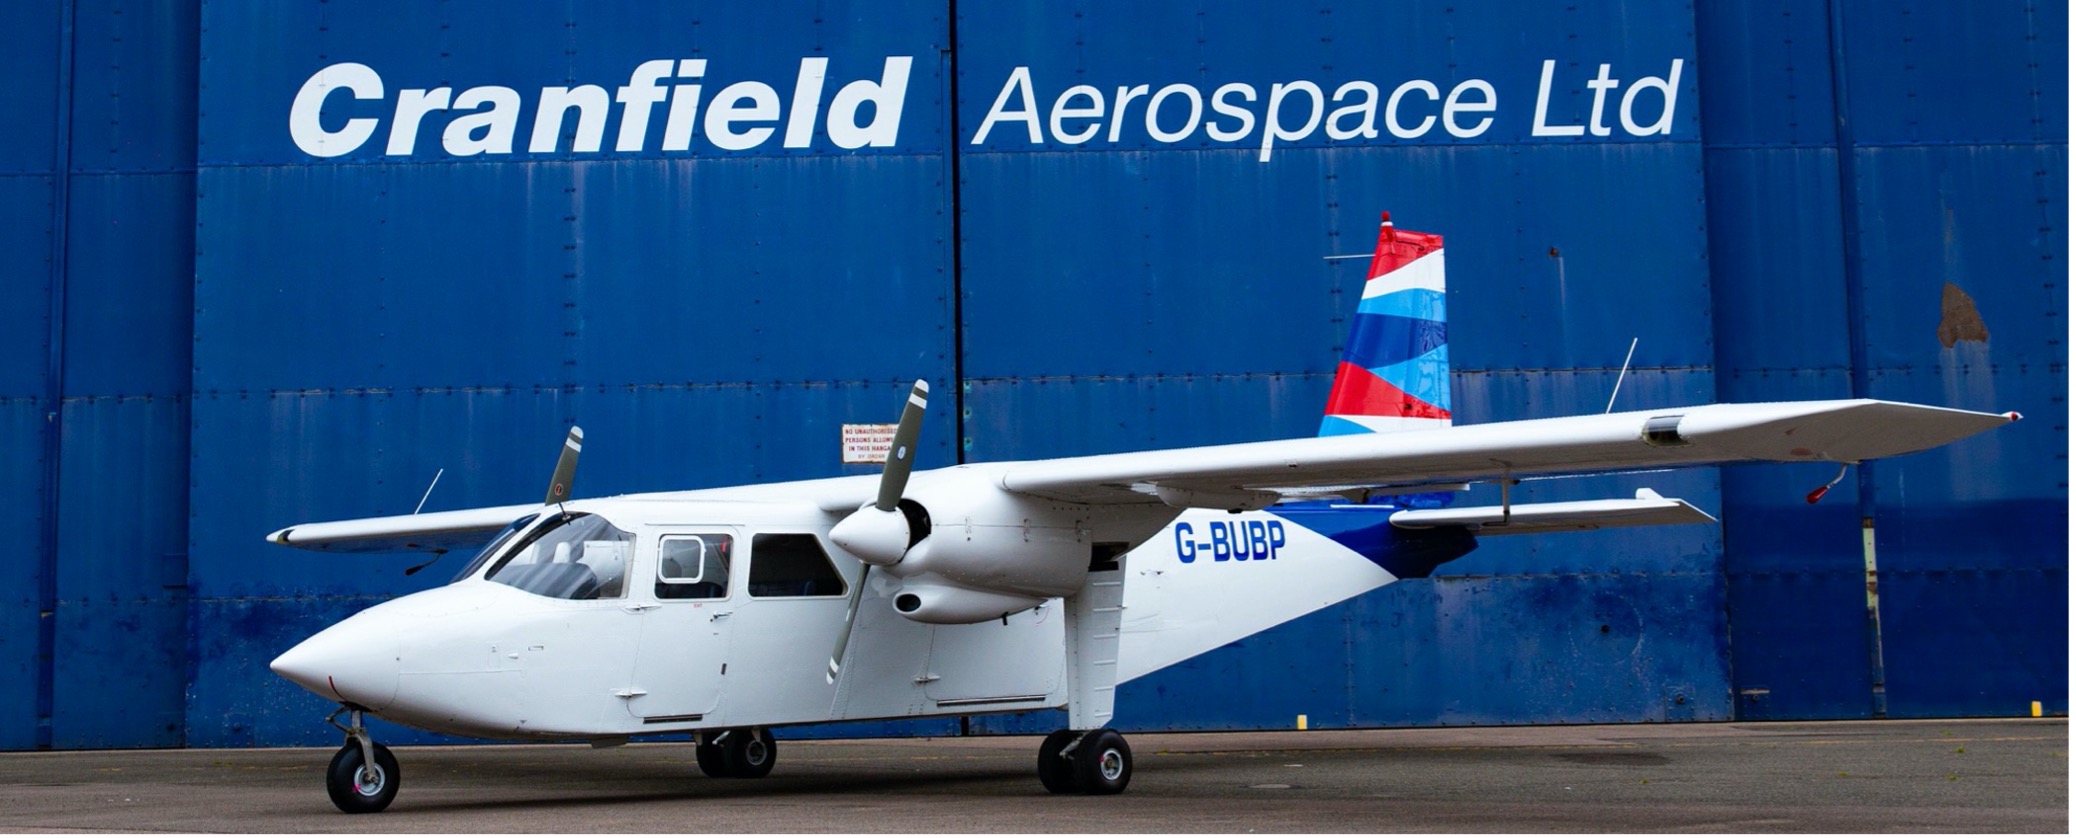 Cranfield Aerospace Solutions obtains a B-N Islander aircraft to convert to zero emissions hydrogen fuel cell propulsion